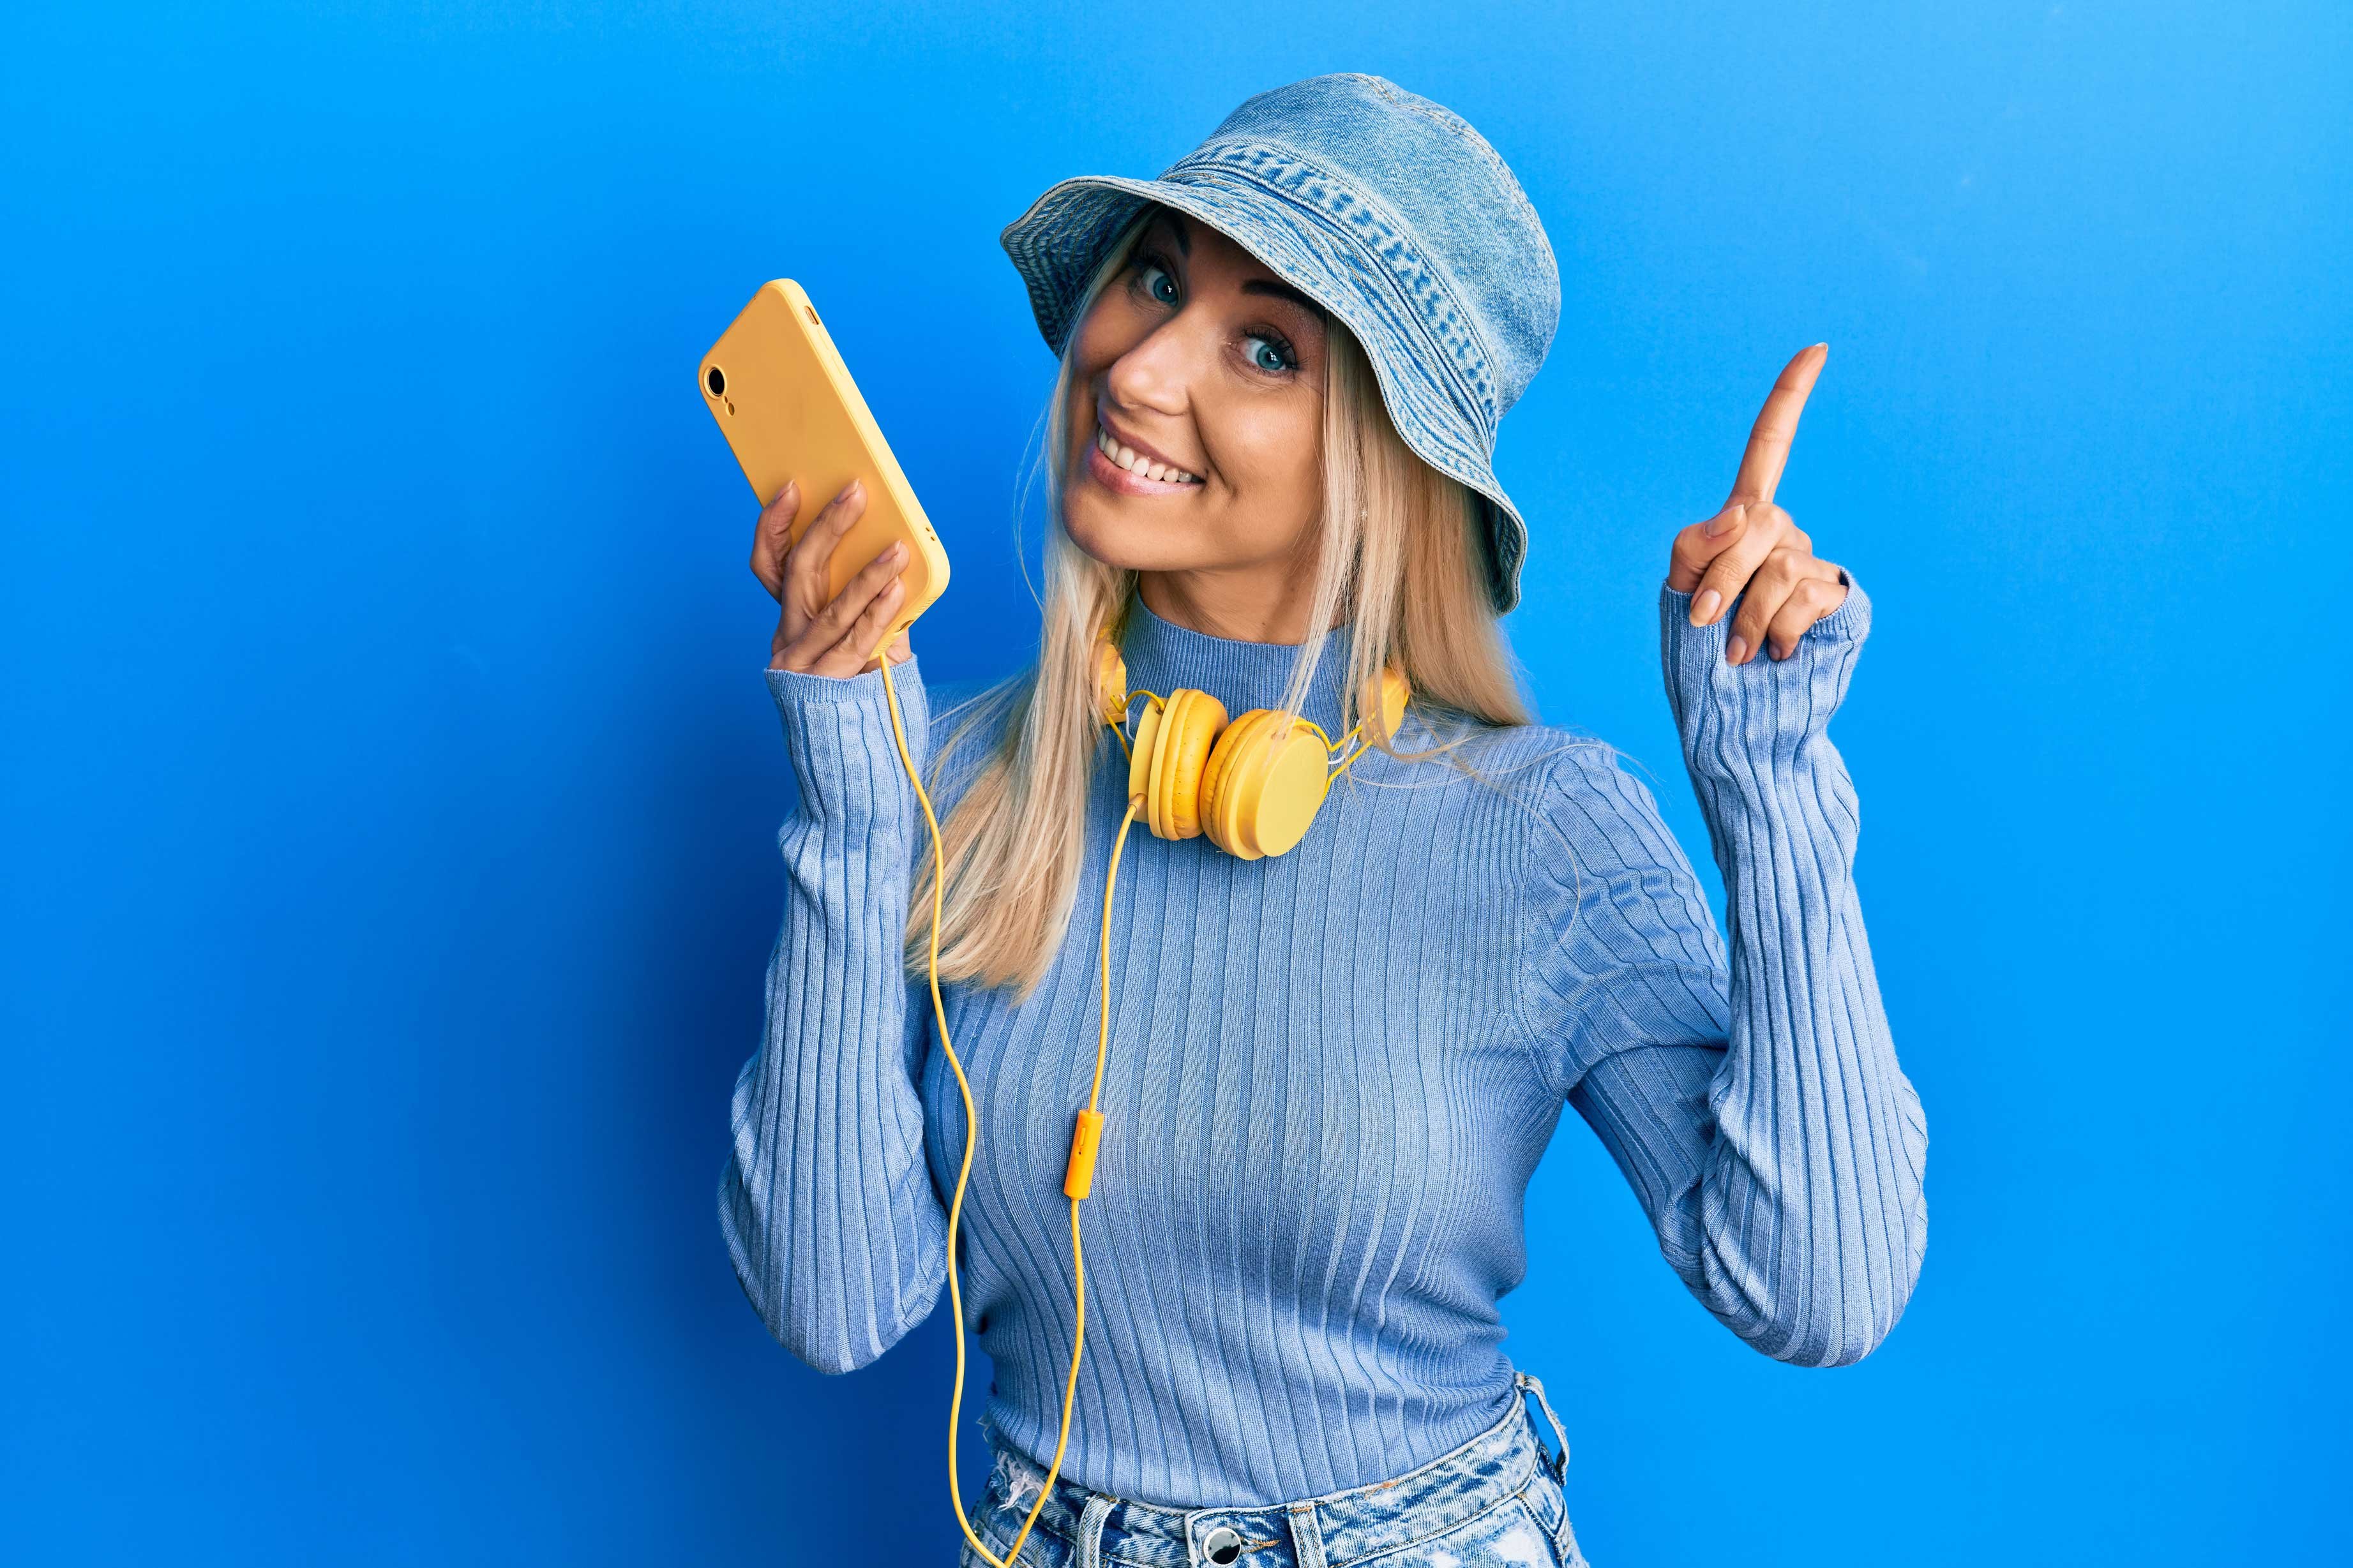 Excited blonde girl holding a yellow phone